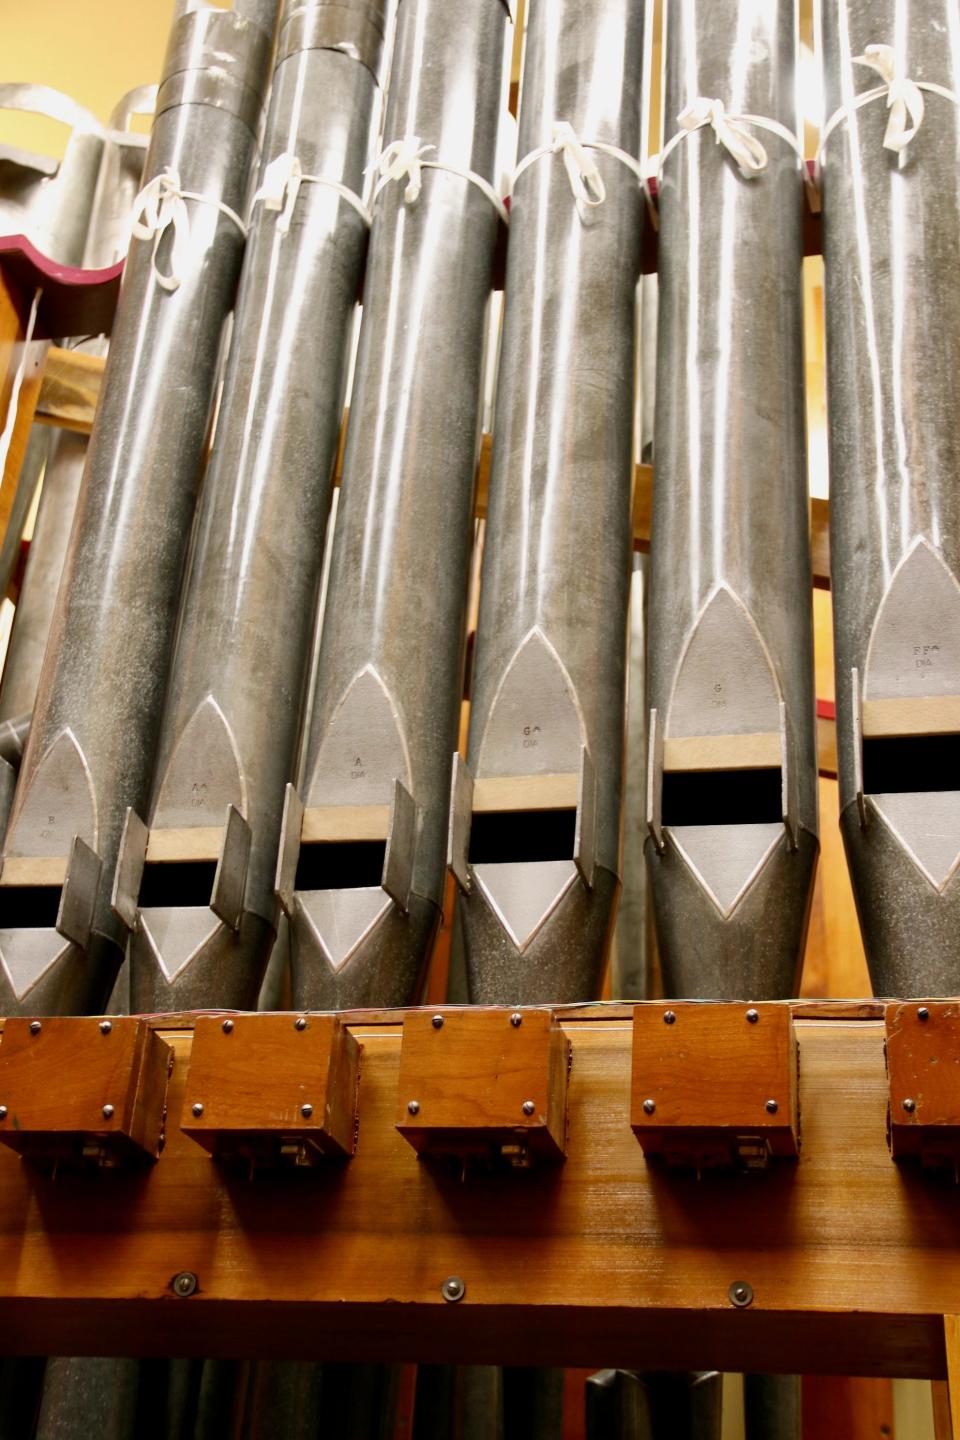 A look at some of the pipes in the 1925 Wurlitzer pipe organ that's been restored for installation in Milwaukee's Oriental Theatre.